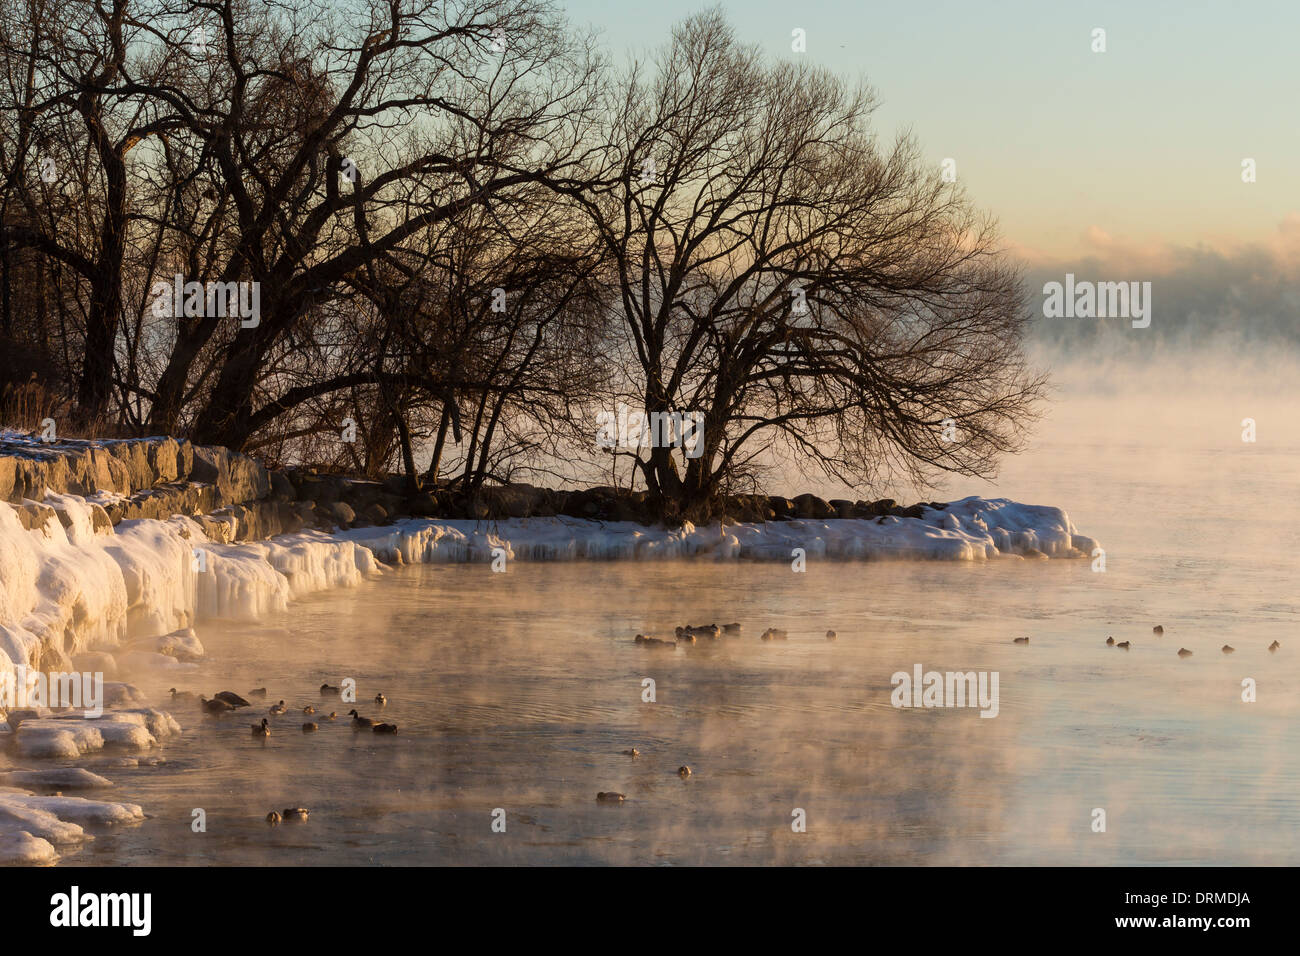 Ducks, geese and other waterfowl bath along the steaming and partially frozen Lake Ontario shoreline in extreme cold weather Stock Photo